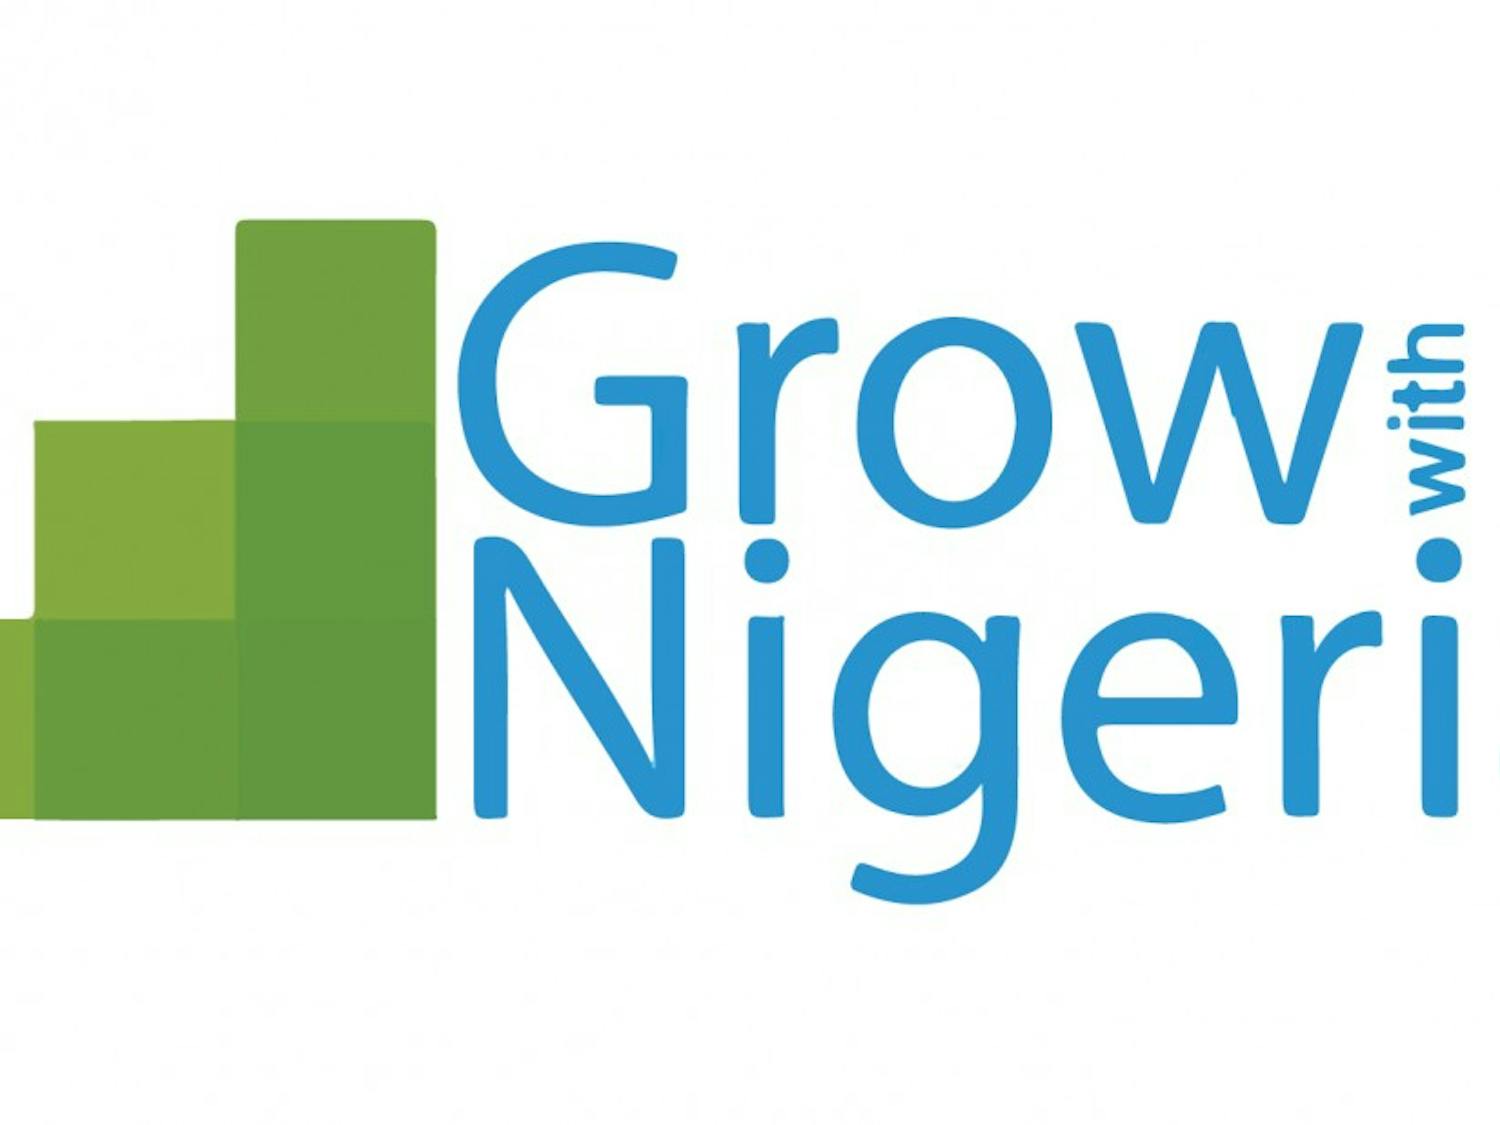 Grow with Nigeria offers summer programs for high school students in Nigeria, allowing them to gain&nbsp;hands-on experience in STEM fields.